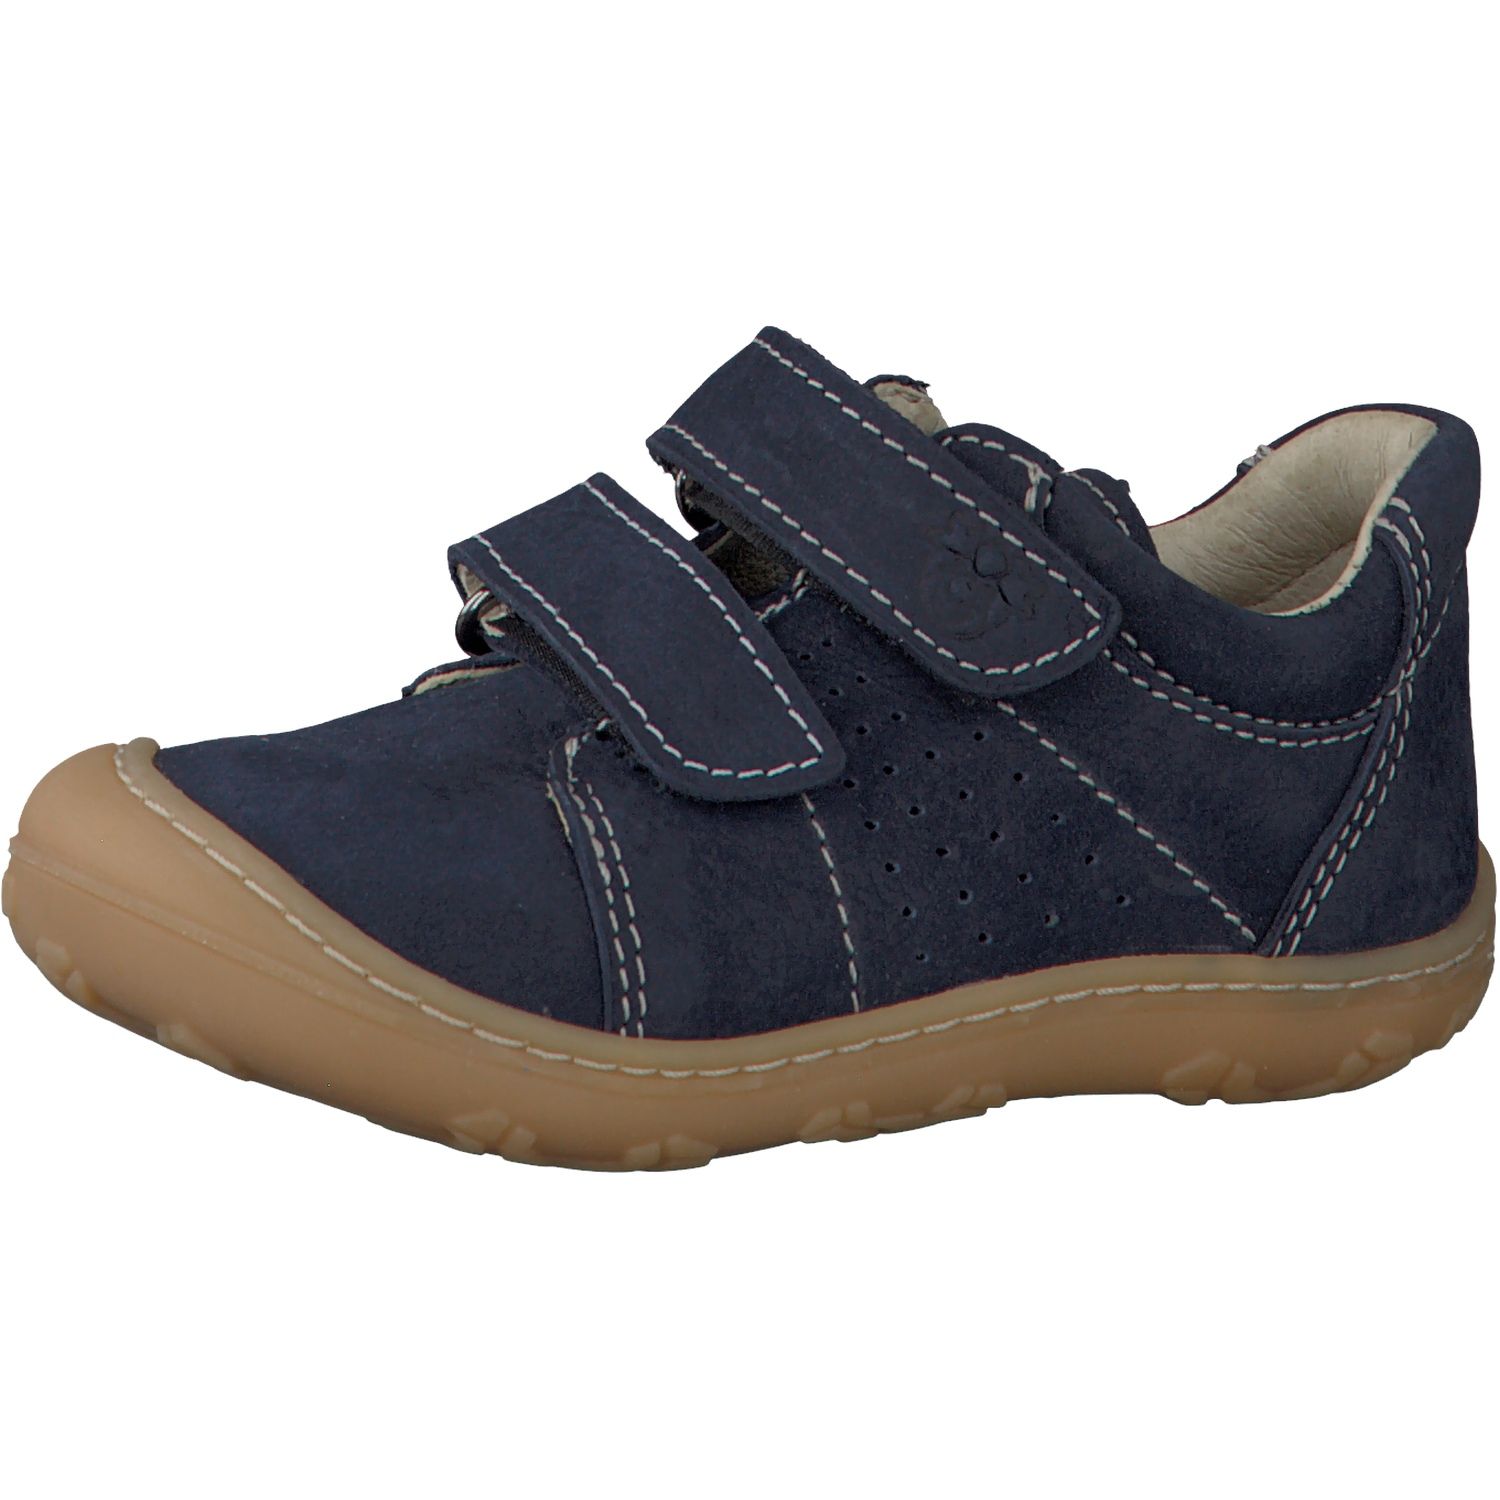 Barefoot Year-round barefoot shoes RICOSTA Tony see 12229-181